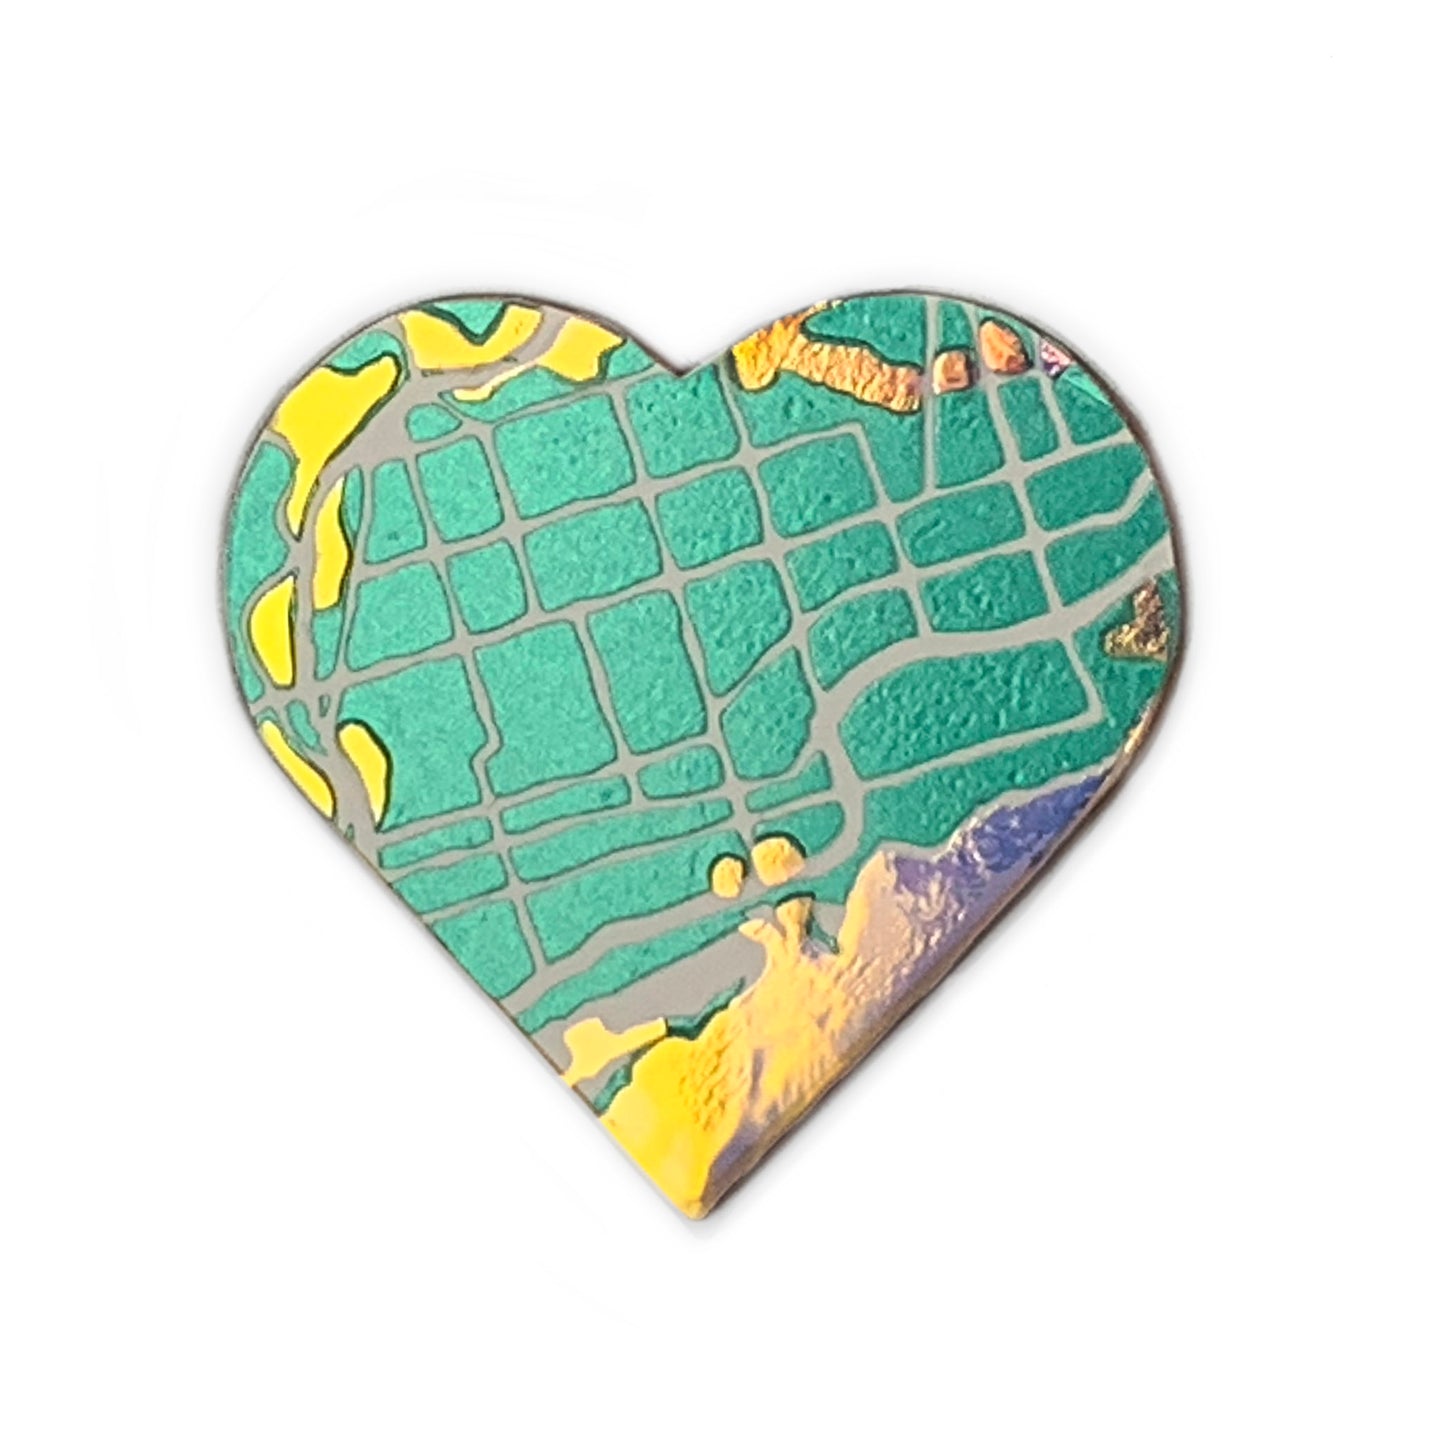 #EastEndLove handmade pin, metallic teal east-end-map heart with holographic accents on wood base - front